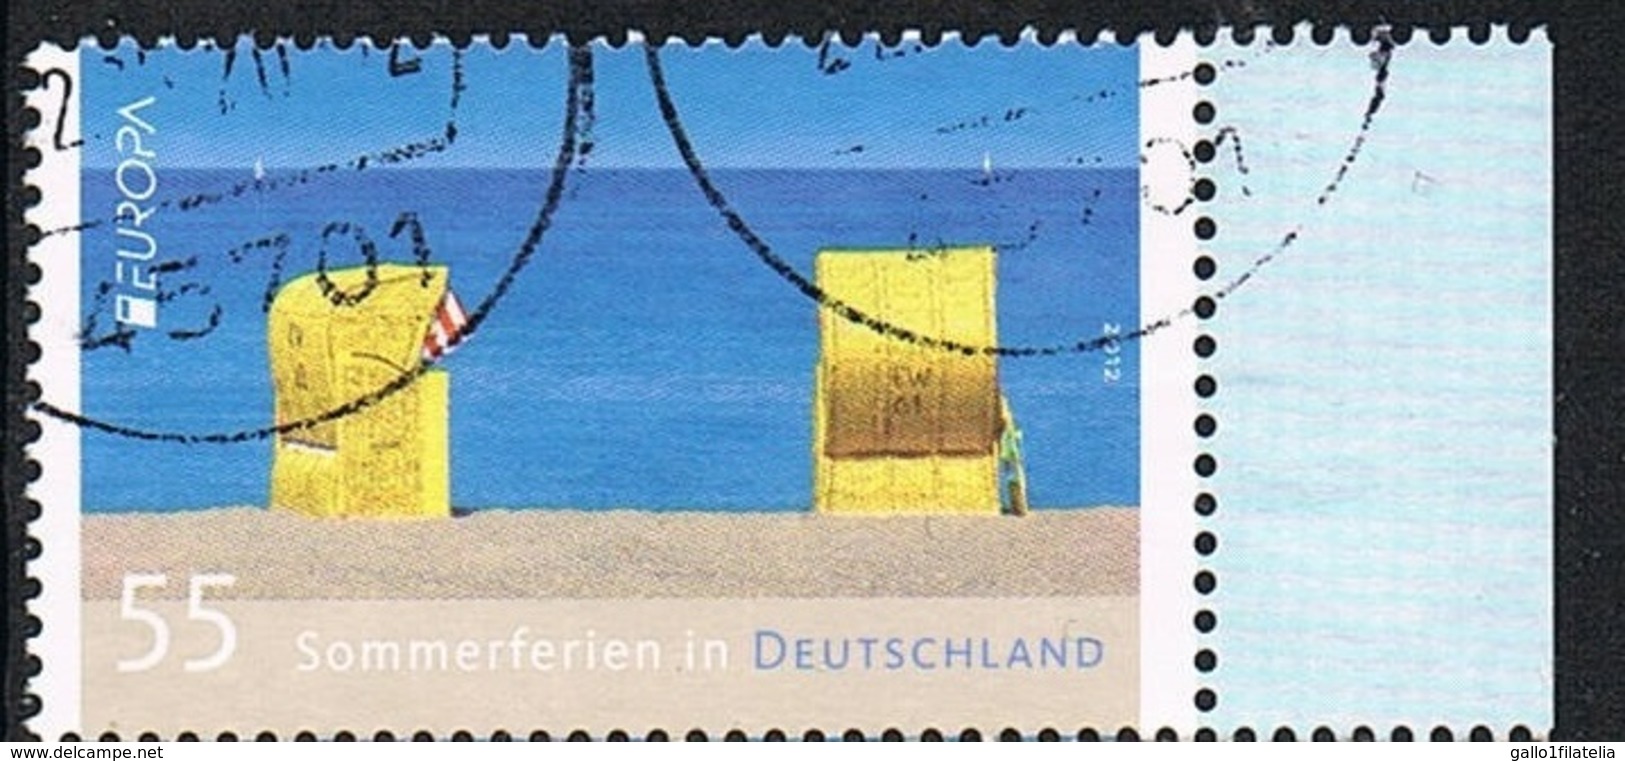 2012 - GERMANIA / GERMANY - EUROPA - LE VACANZE / THE HOLIDAYS - USATI / USED. - 2012